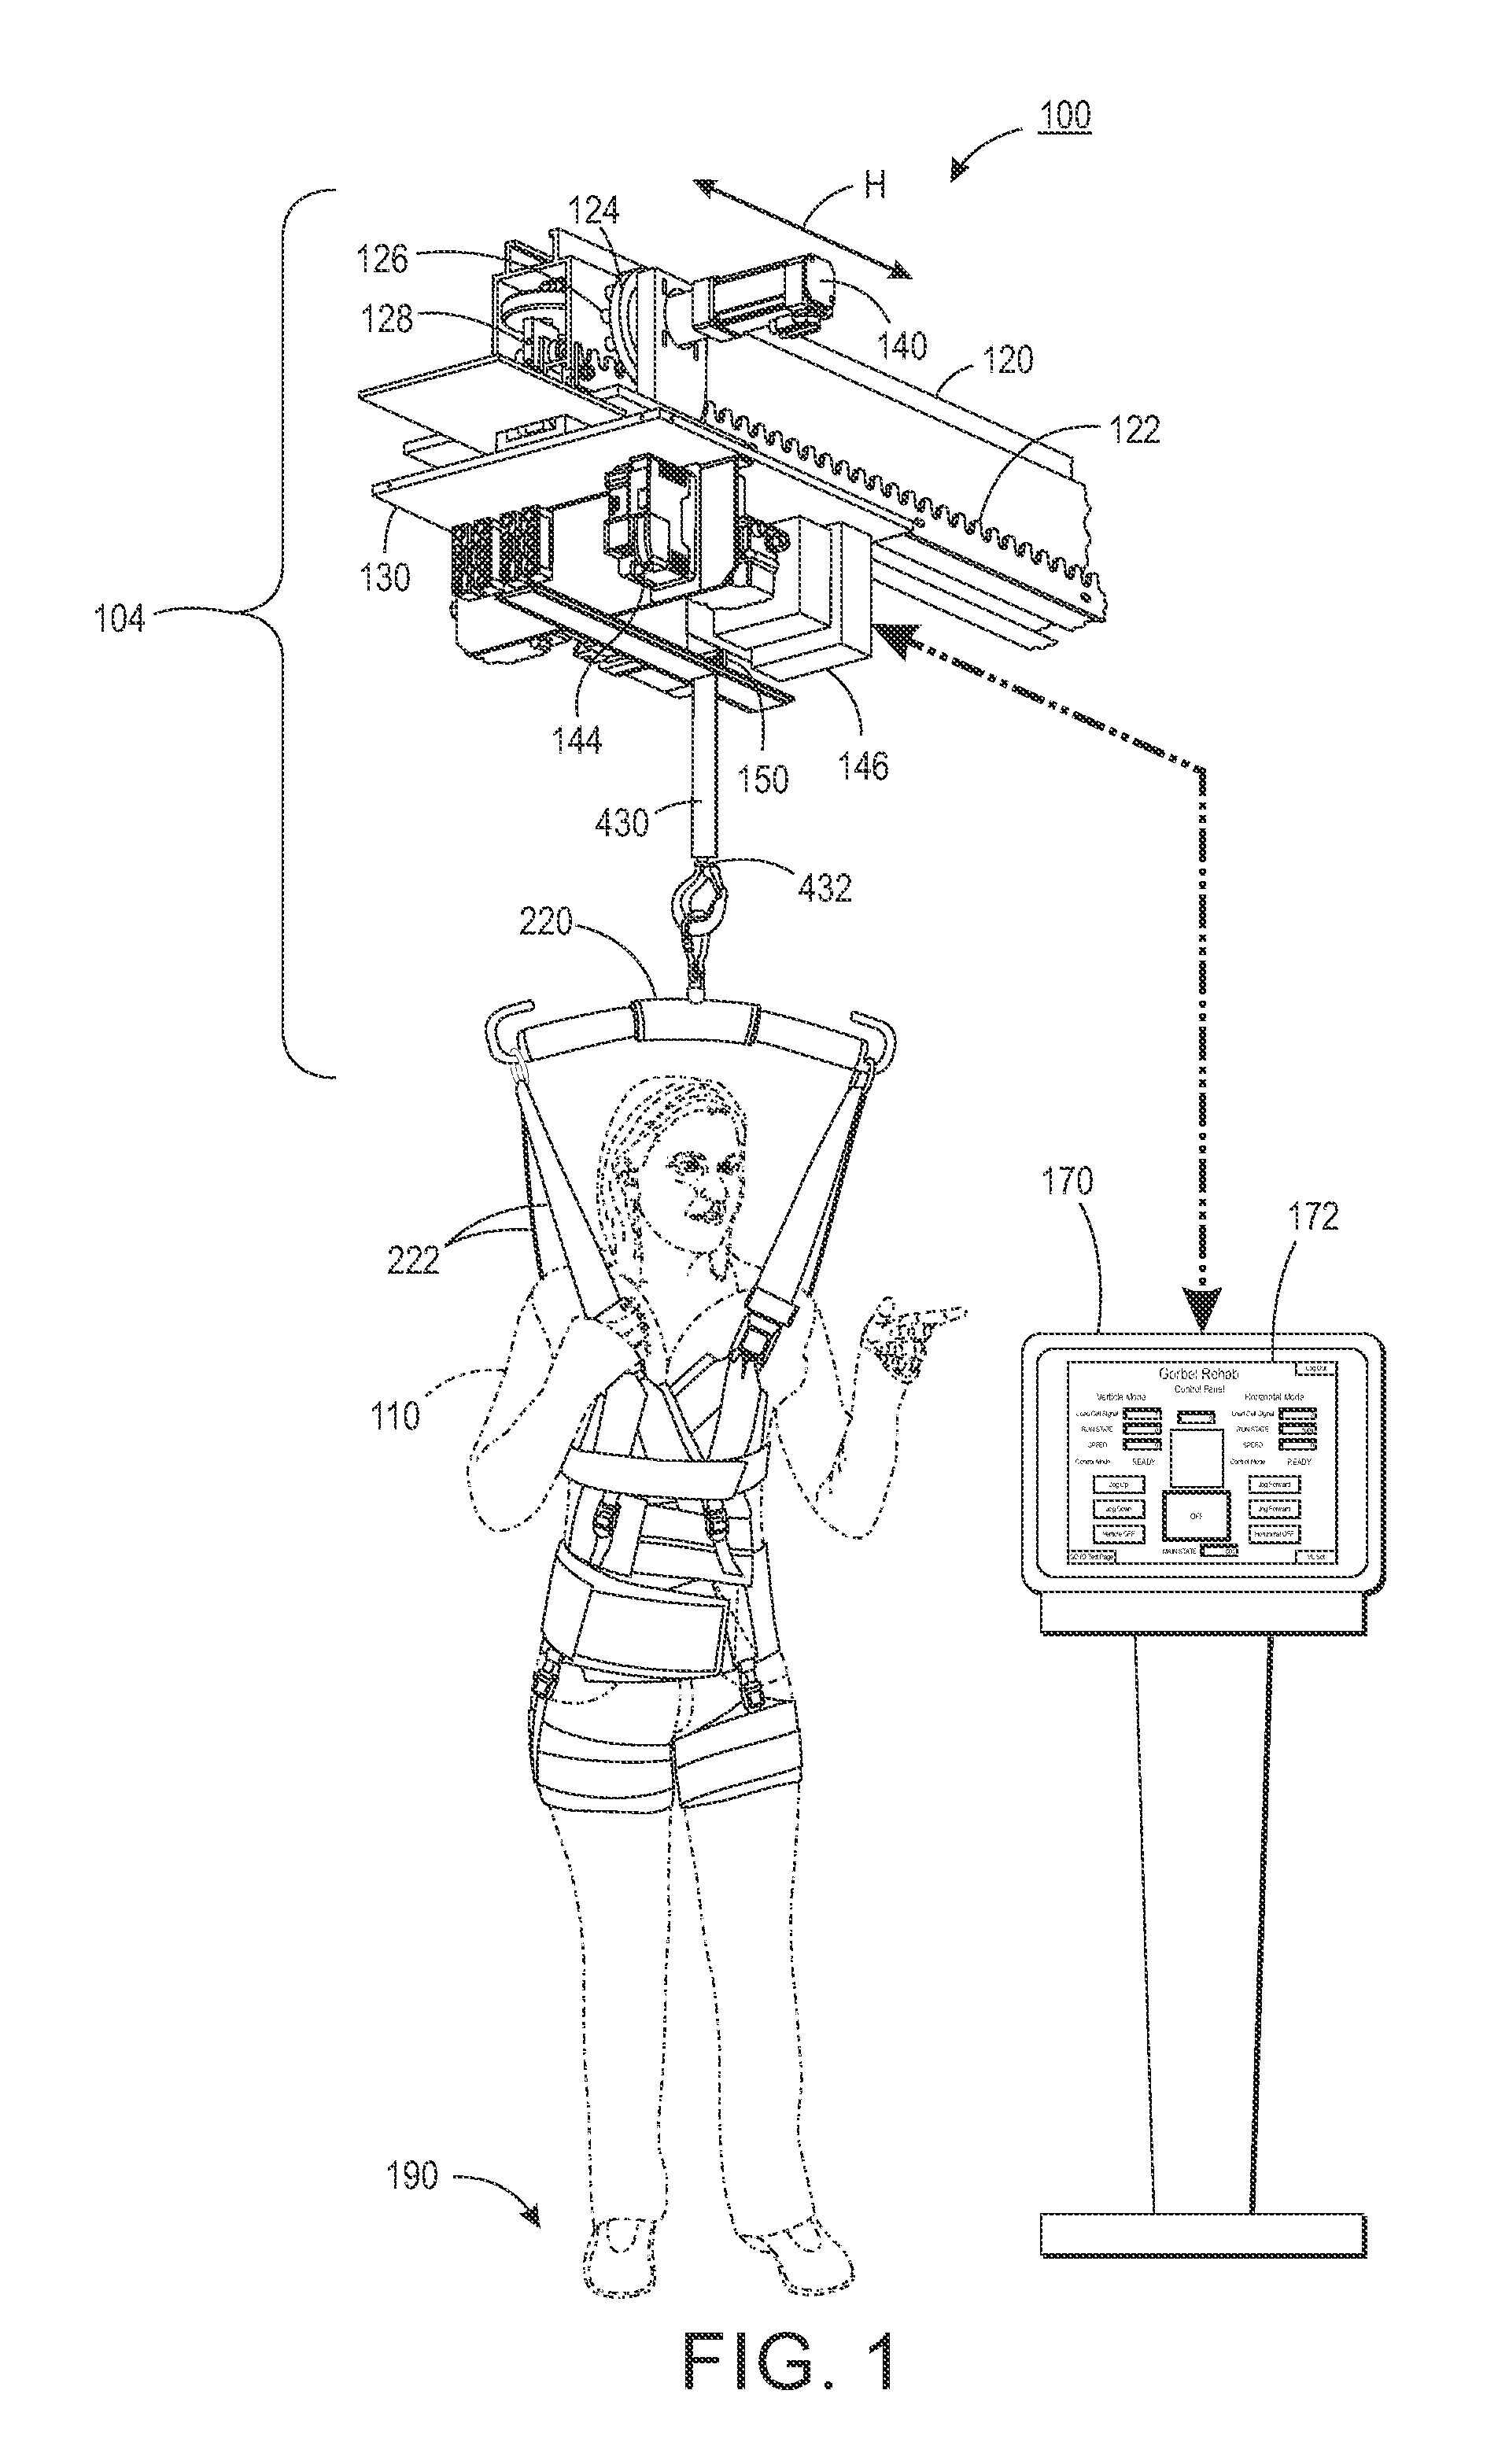 Medical rehab lift system and method with horizontal and vertical force sensing and motion control